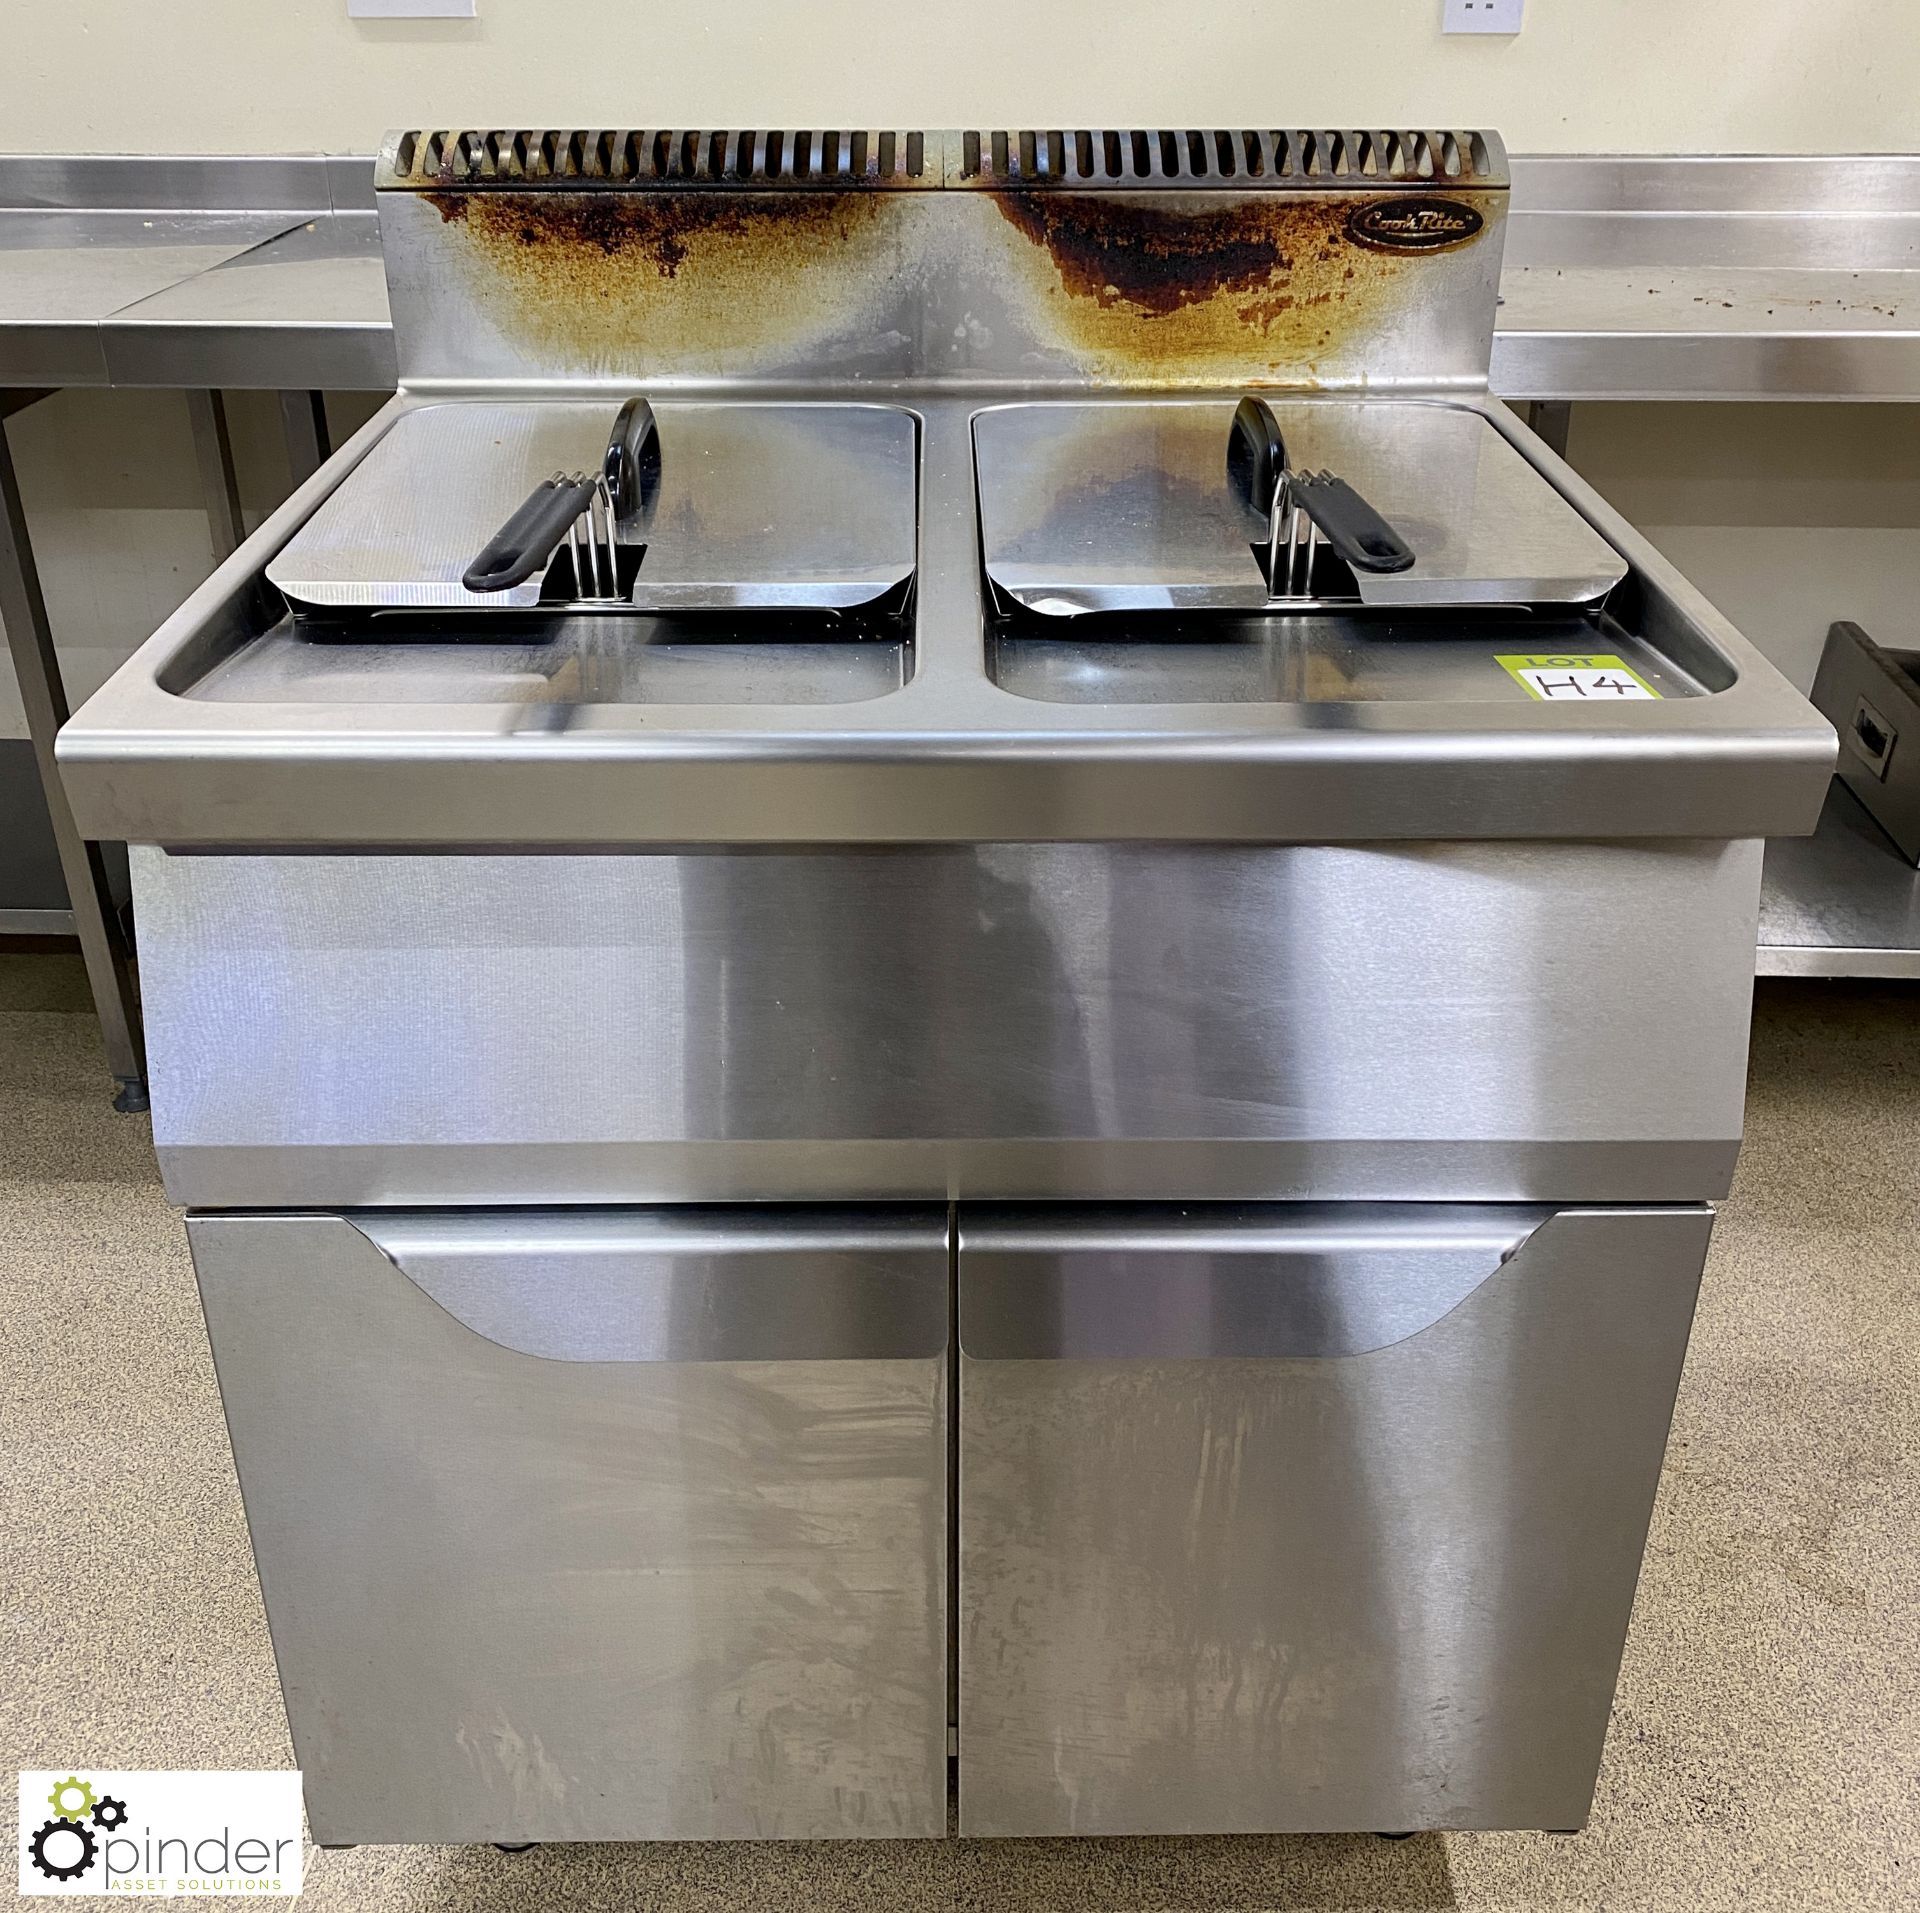 Cook Rite stainless steel gas fired double basket Deep Fat Fryer, with baskets and lids, 800mm x